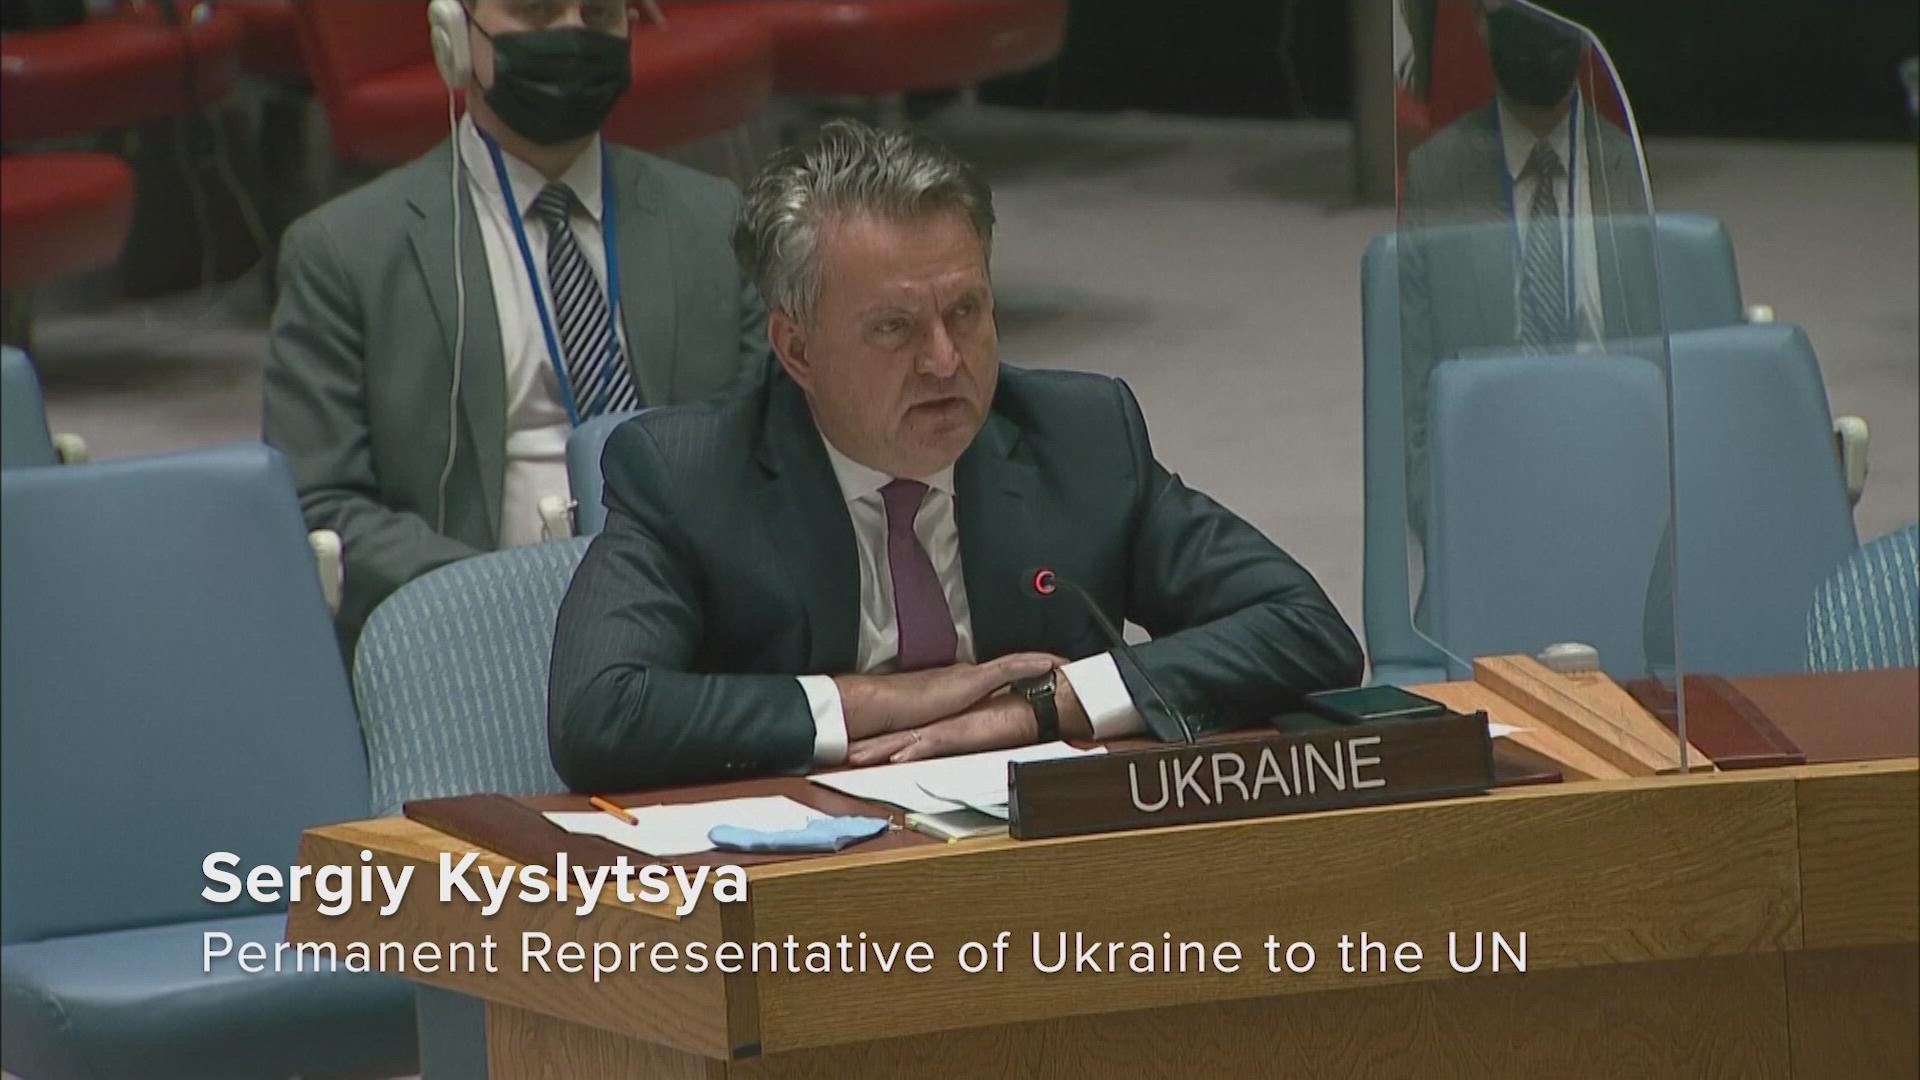 During U.N. Security Council emergency meeting, ambassador Sergiy Kyslytsya asked which countries might be next after Russia's moves in Ukraine.